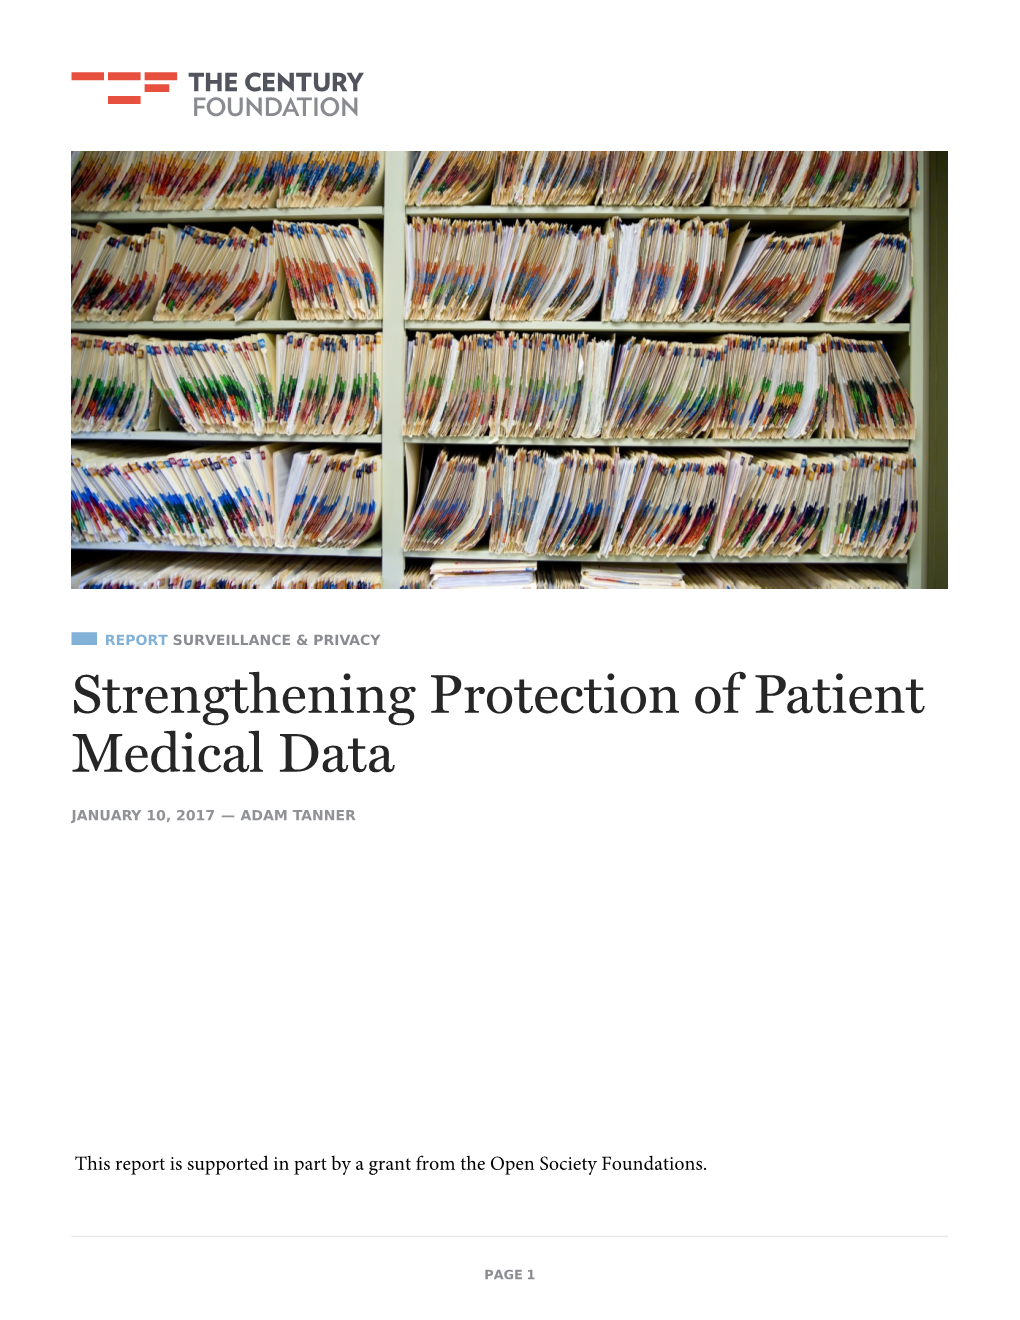 Strengthening Protection of Patient Medical Data